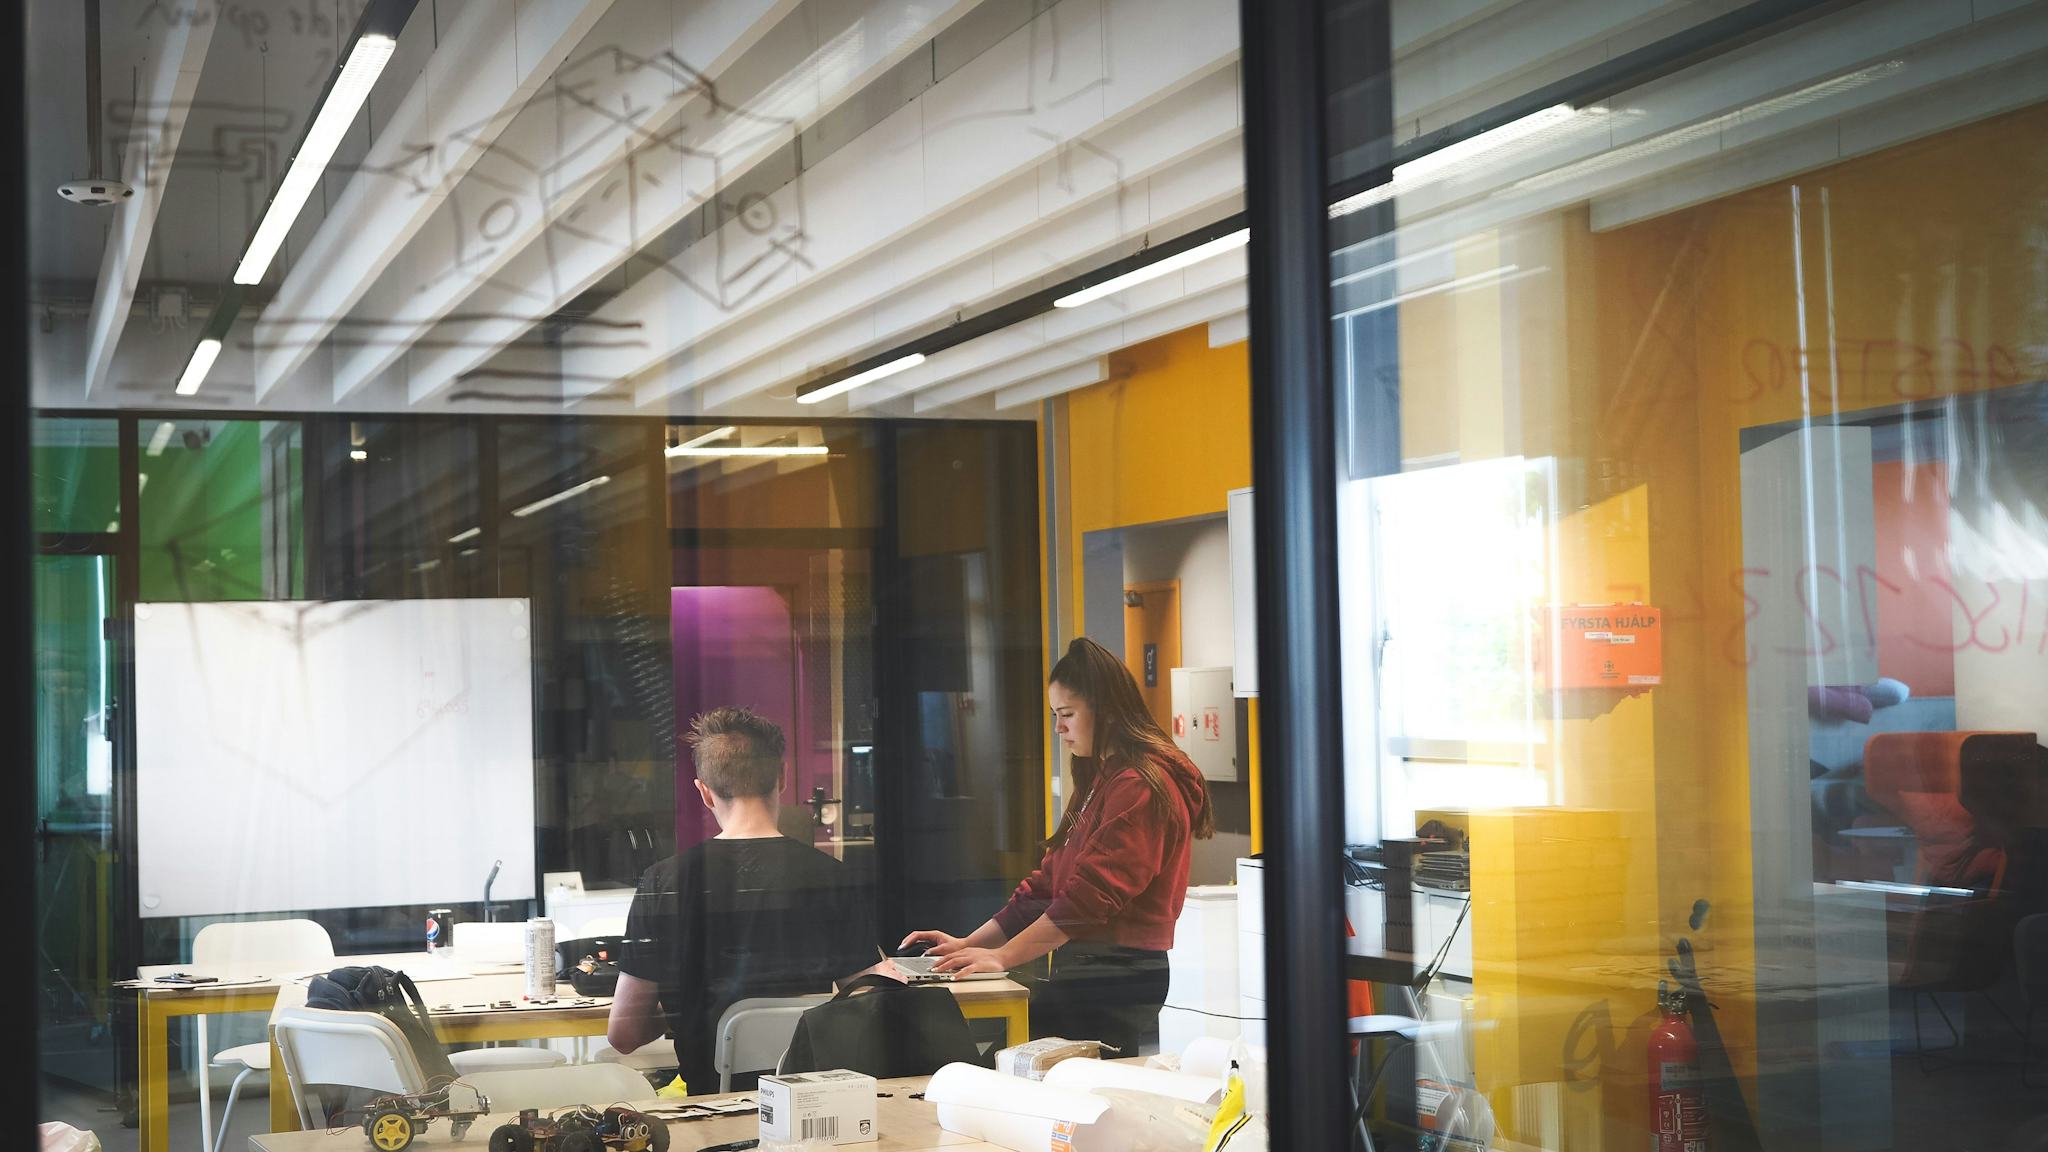 Two people working at desks in a brightly lit modern office space with vibrant yellow walls